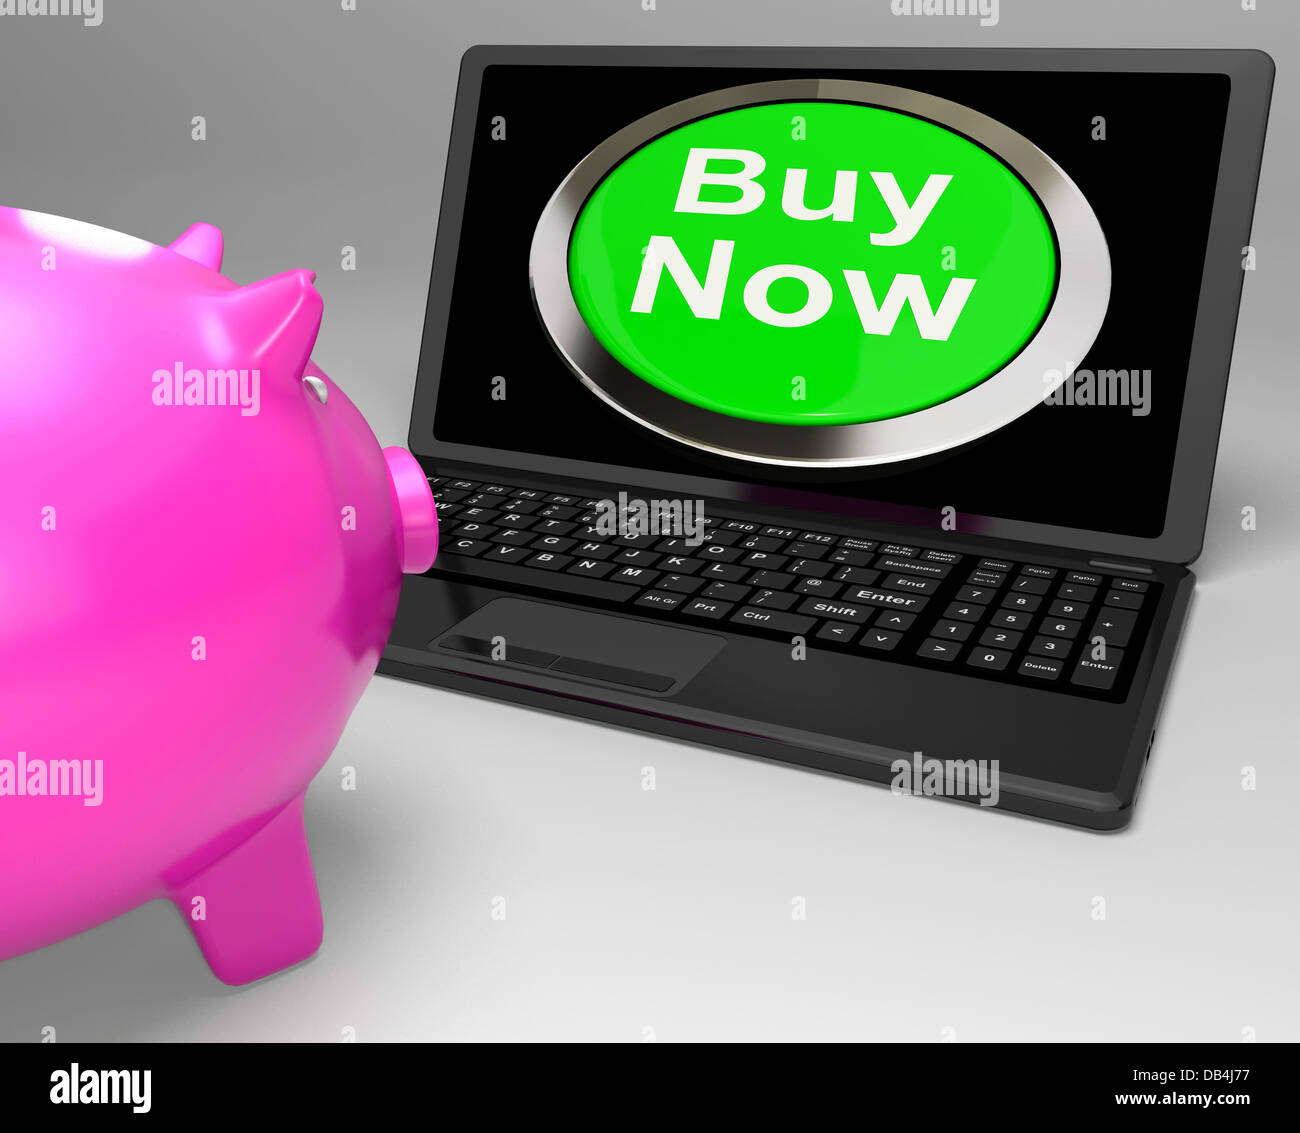 Buy Now Button On Laptop Showing Commerce Stock Photo